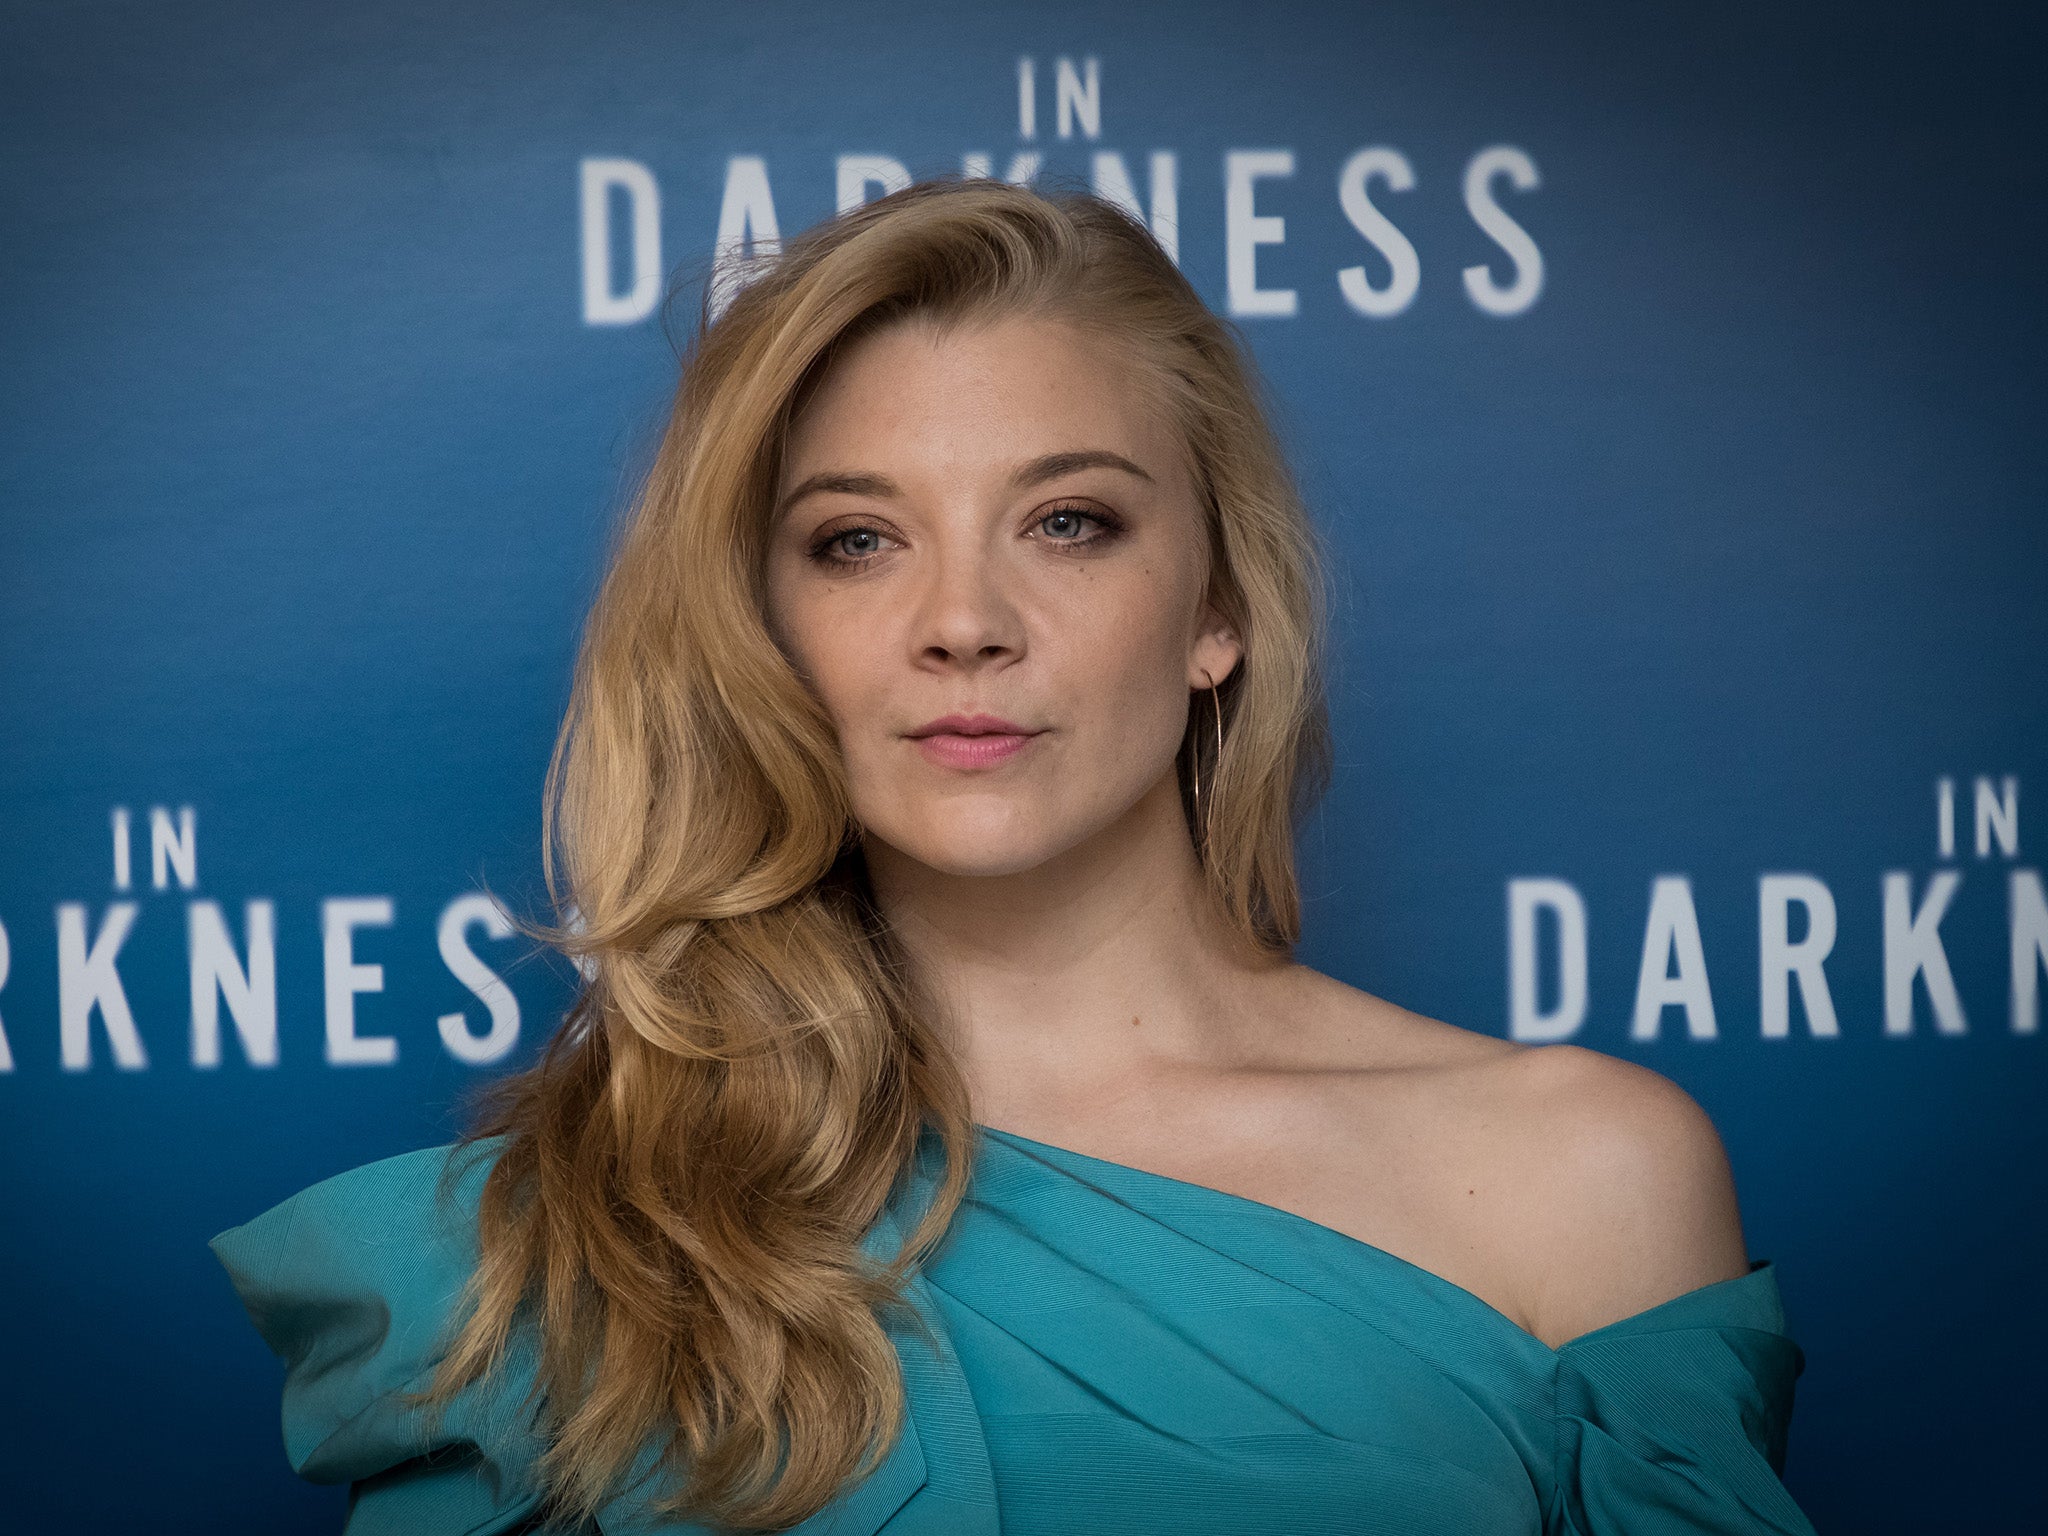 Natalie Dormer On Co Writing Her New Thriller In Darkness And Why She Doesnt Want To Just Play 